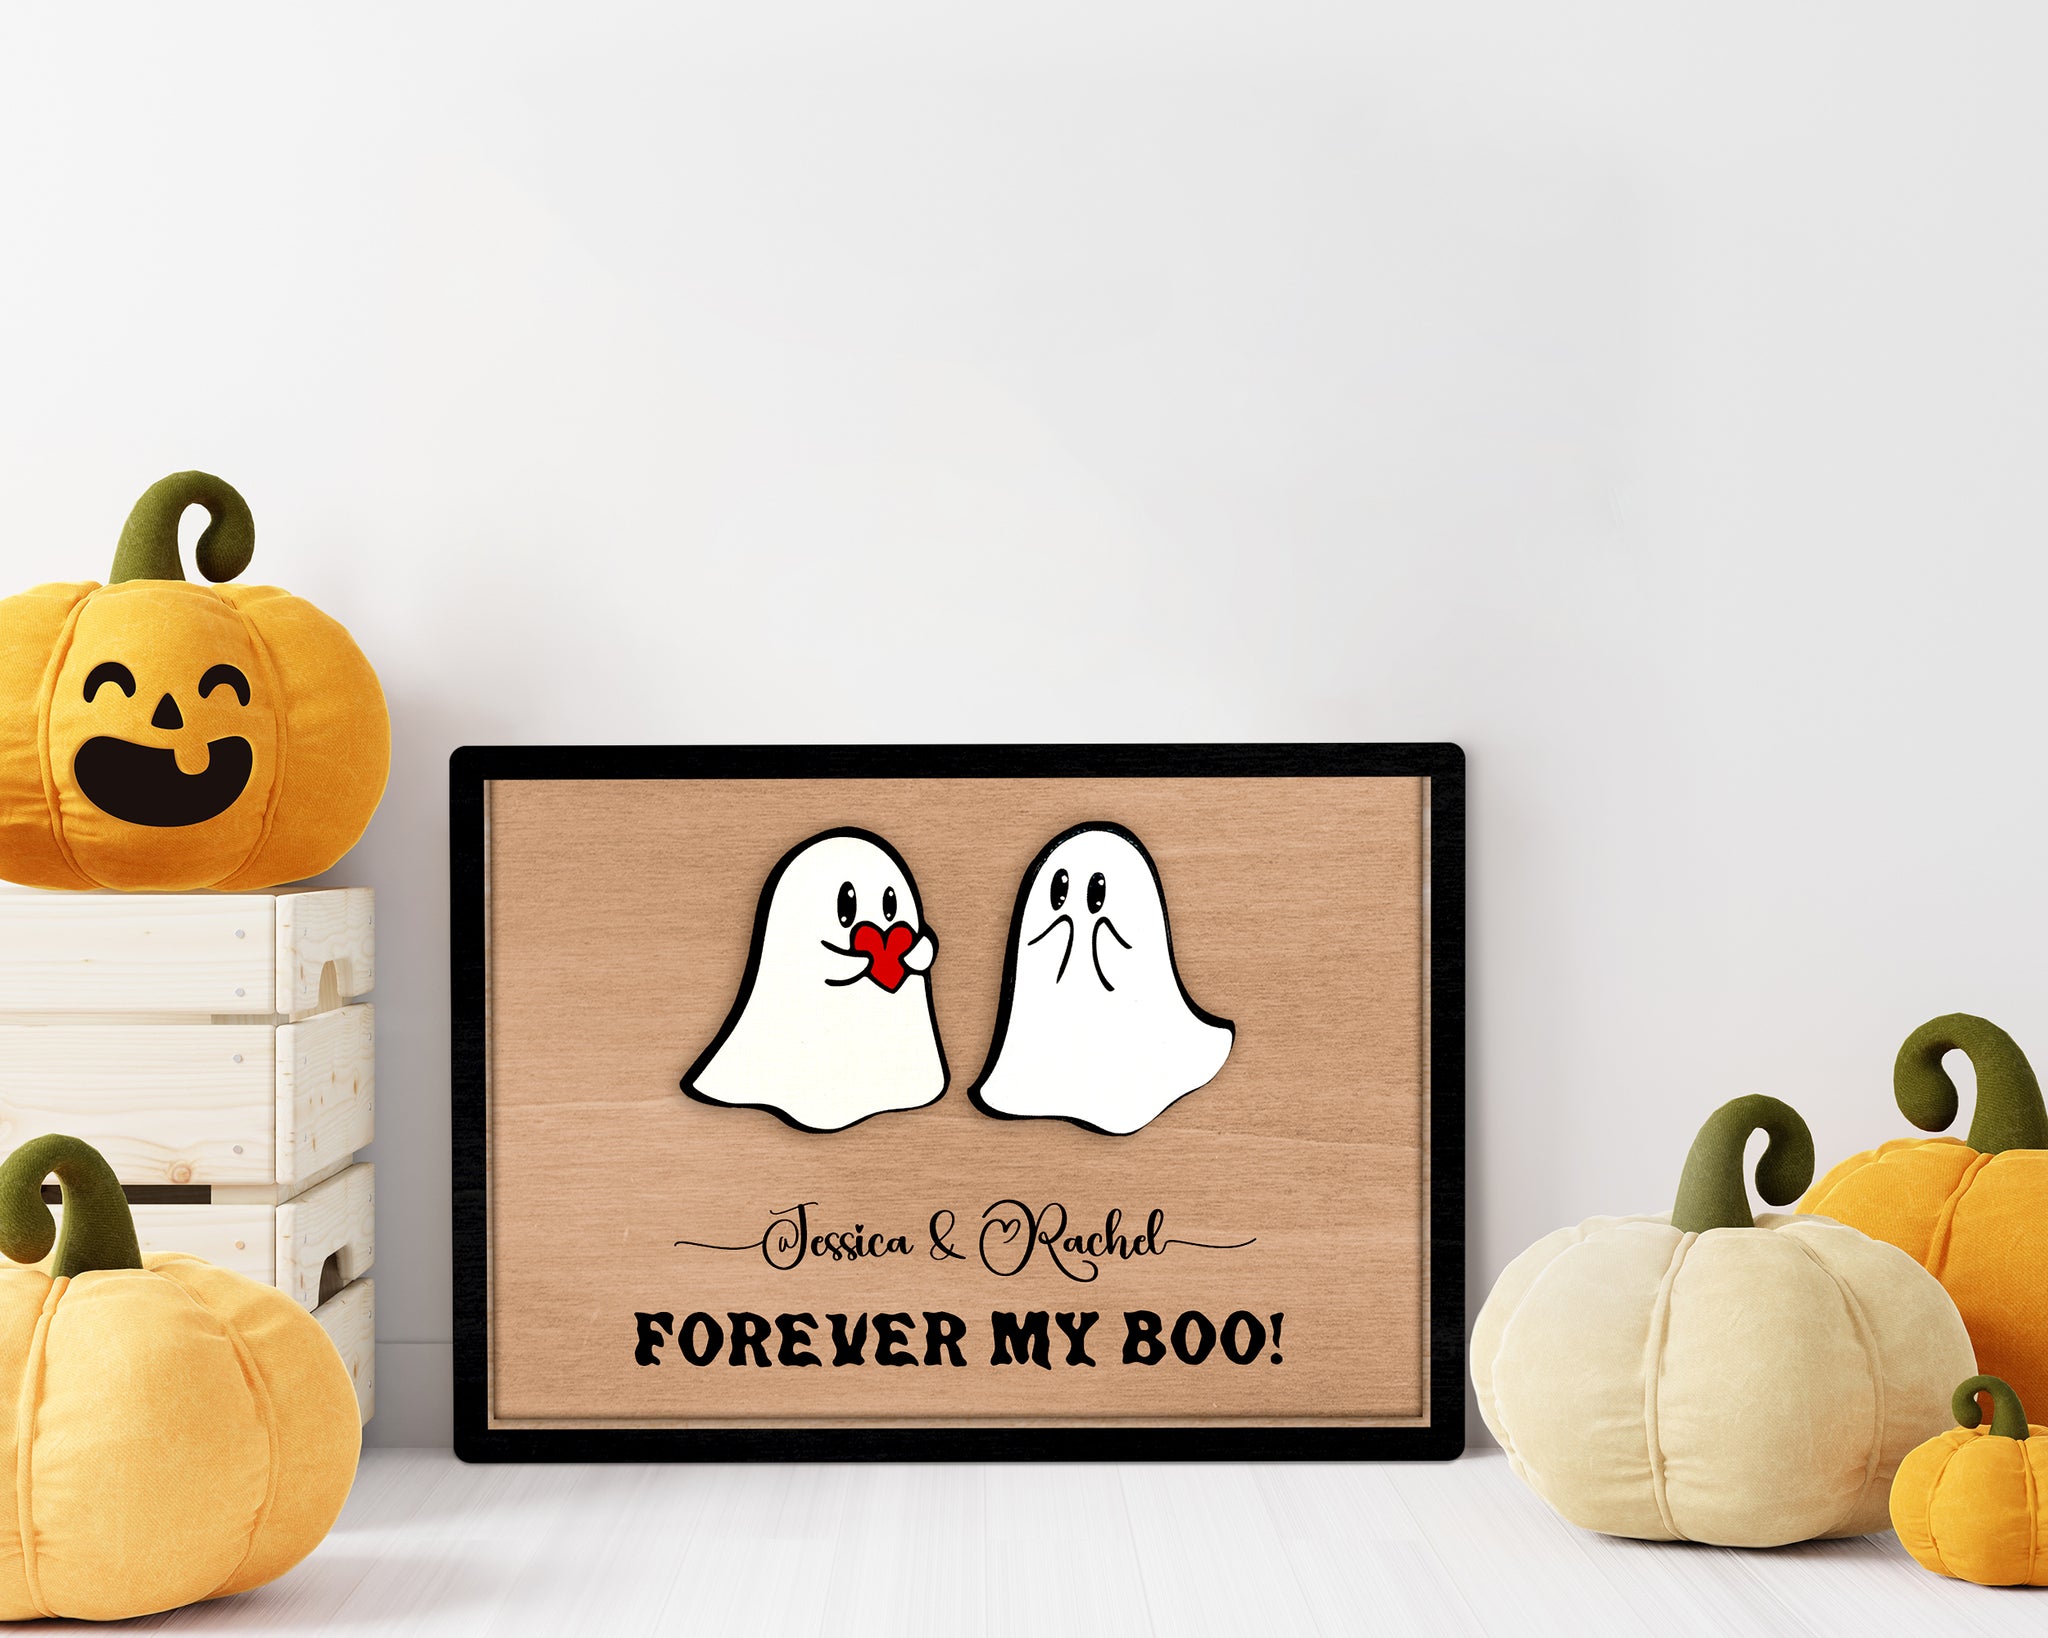 Ghost Couple Gift Sign, Personalized Couple, Personalized Gifts, Custom Couple Gift, Shelf Sitter Mantel, Halloween Decor | KindlyToys